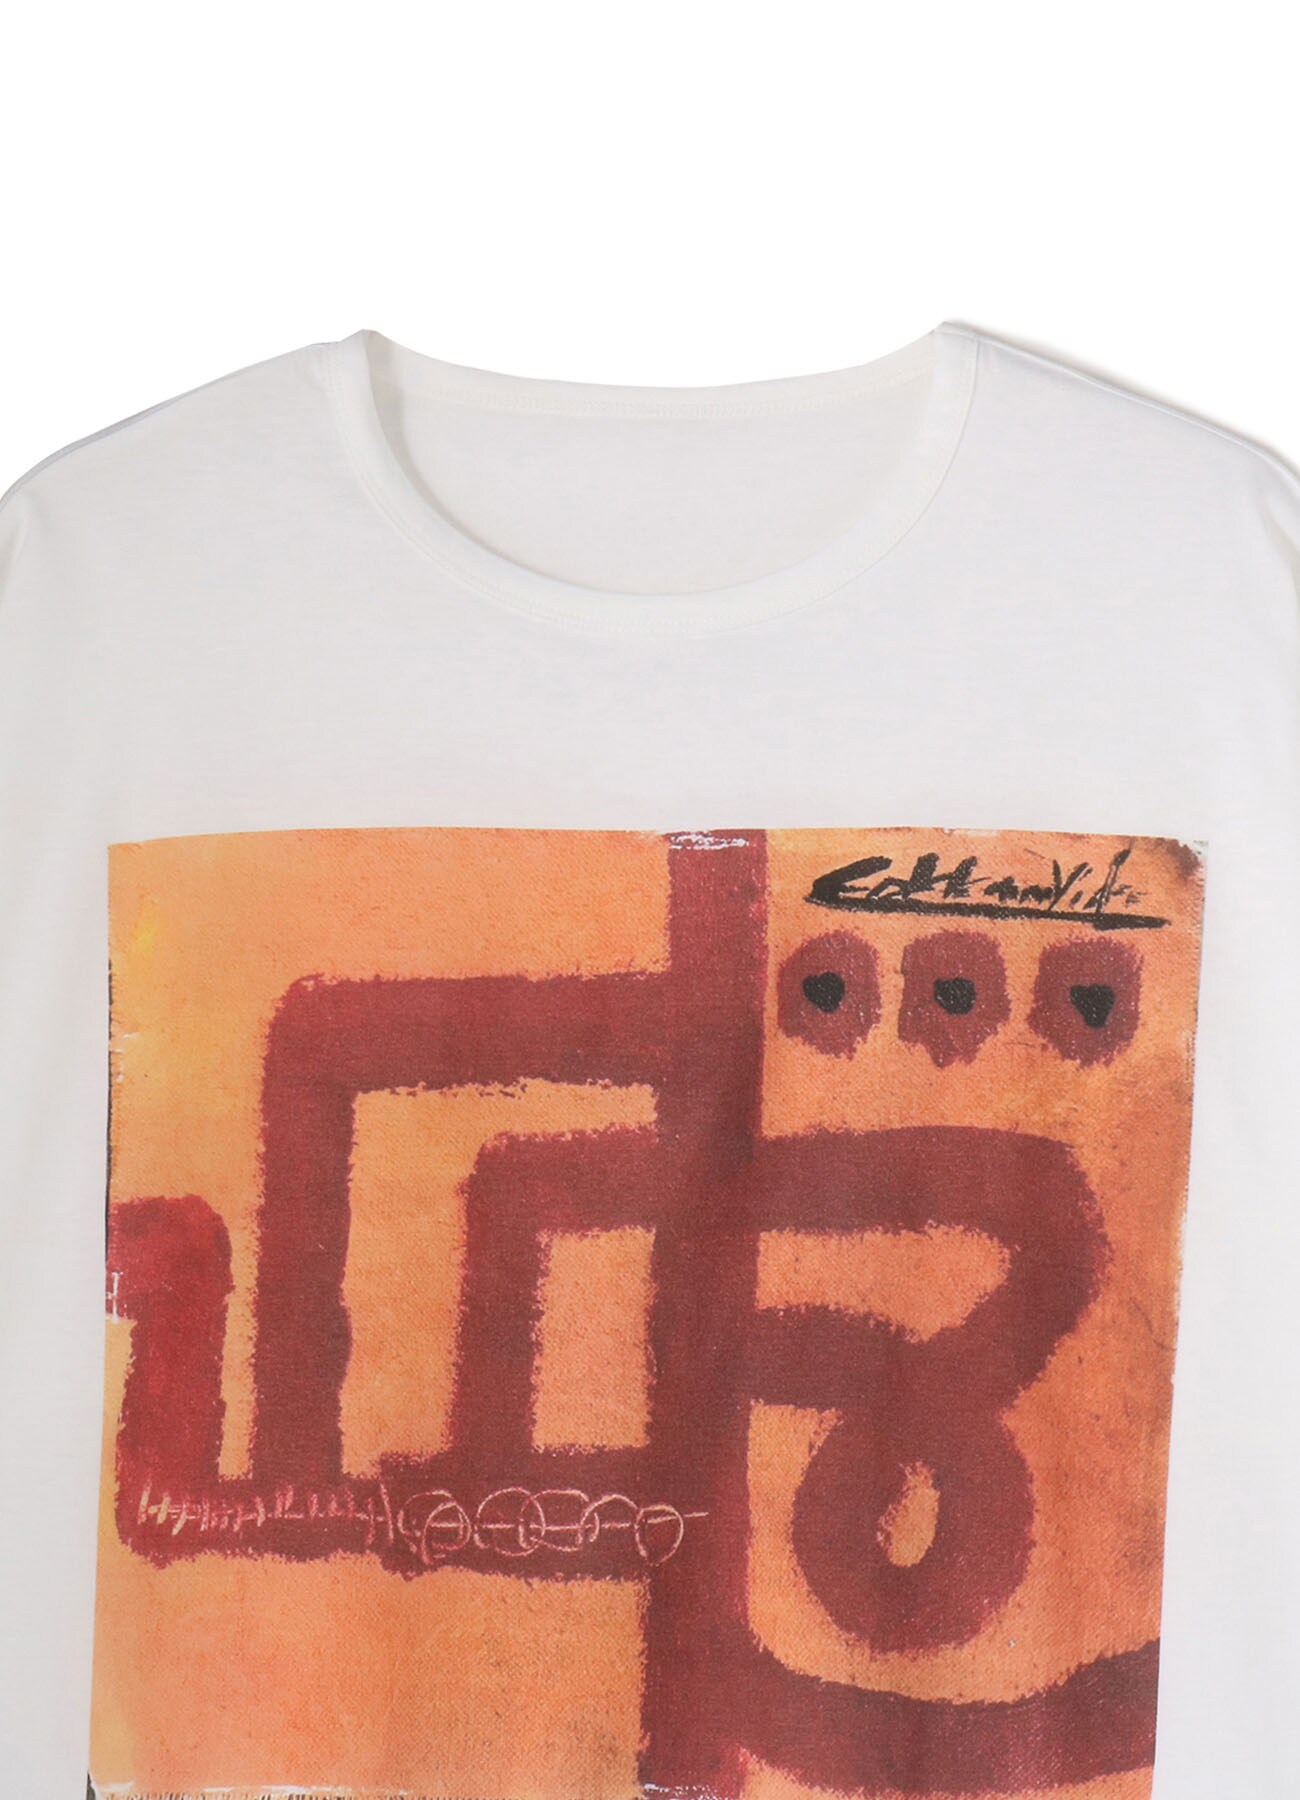 Y's for living x Cokkun Vich / SOFT COTTON JERSEY "ROAD" PRINT WIDE SHIRT